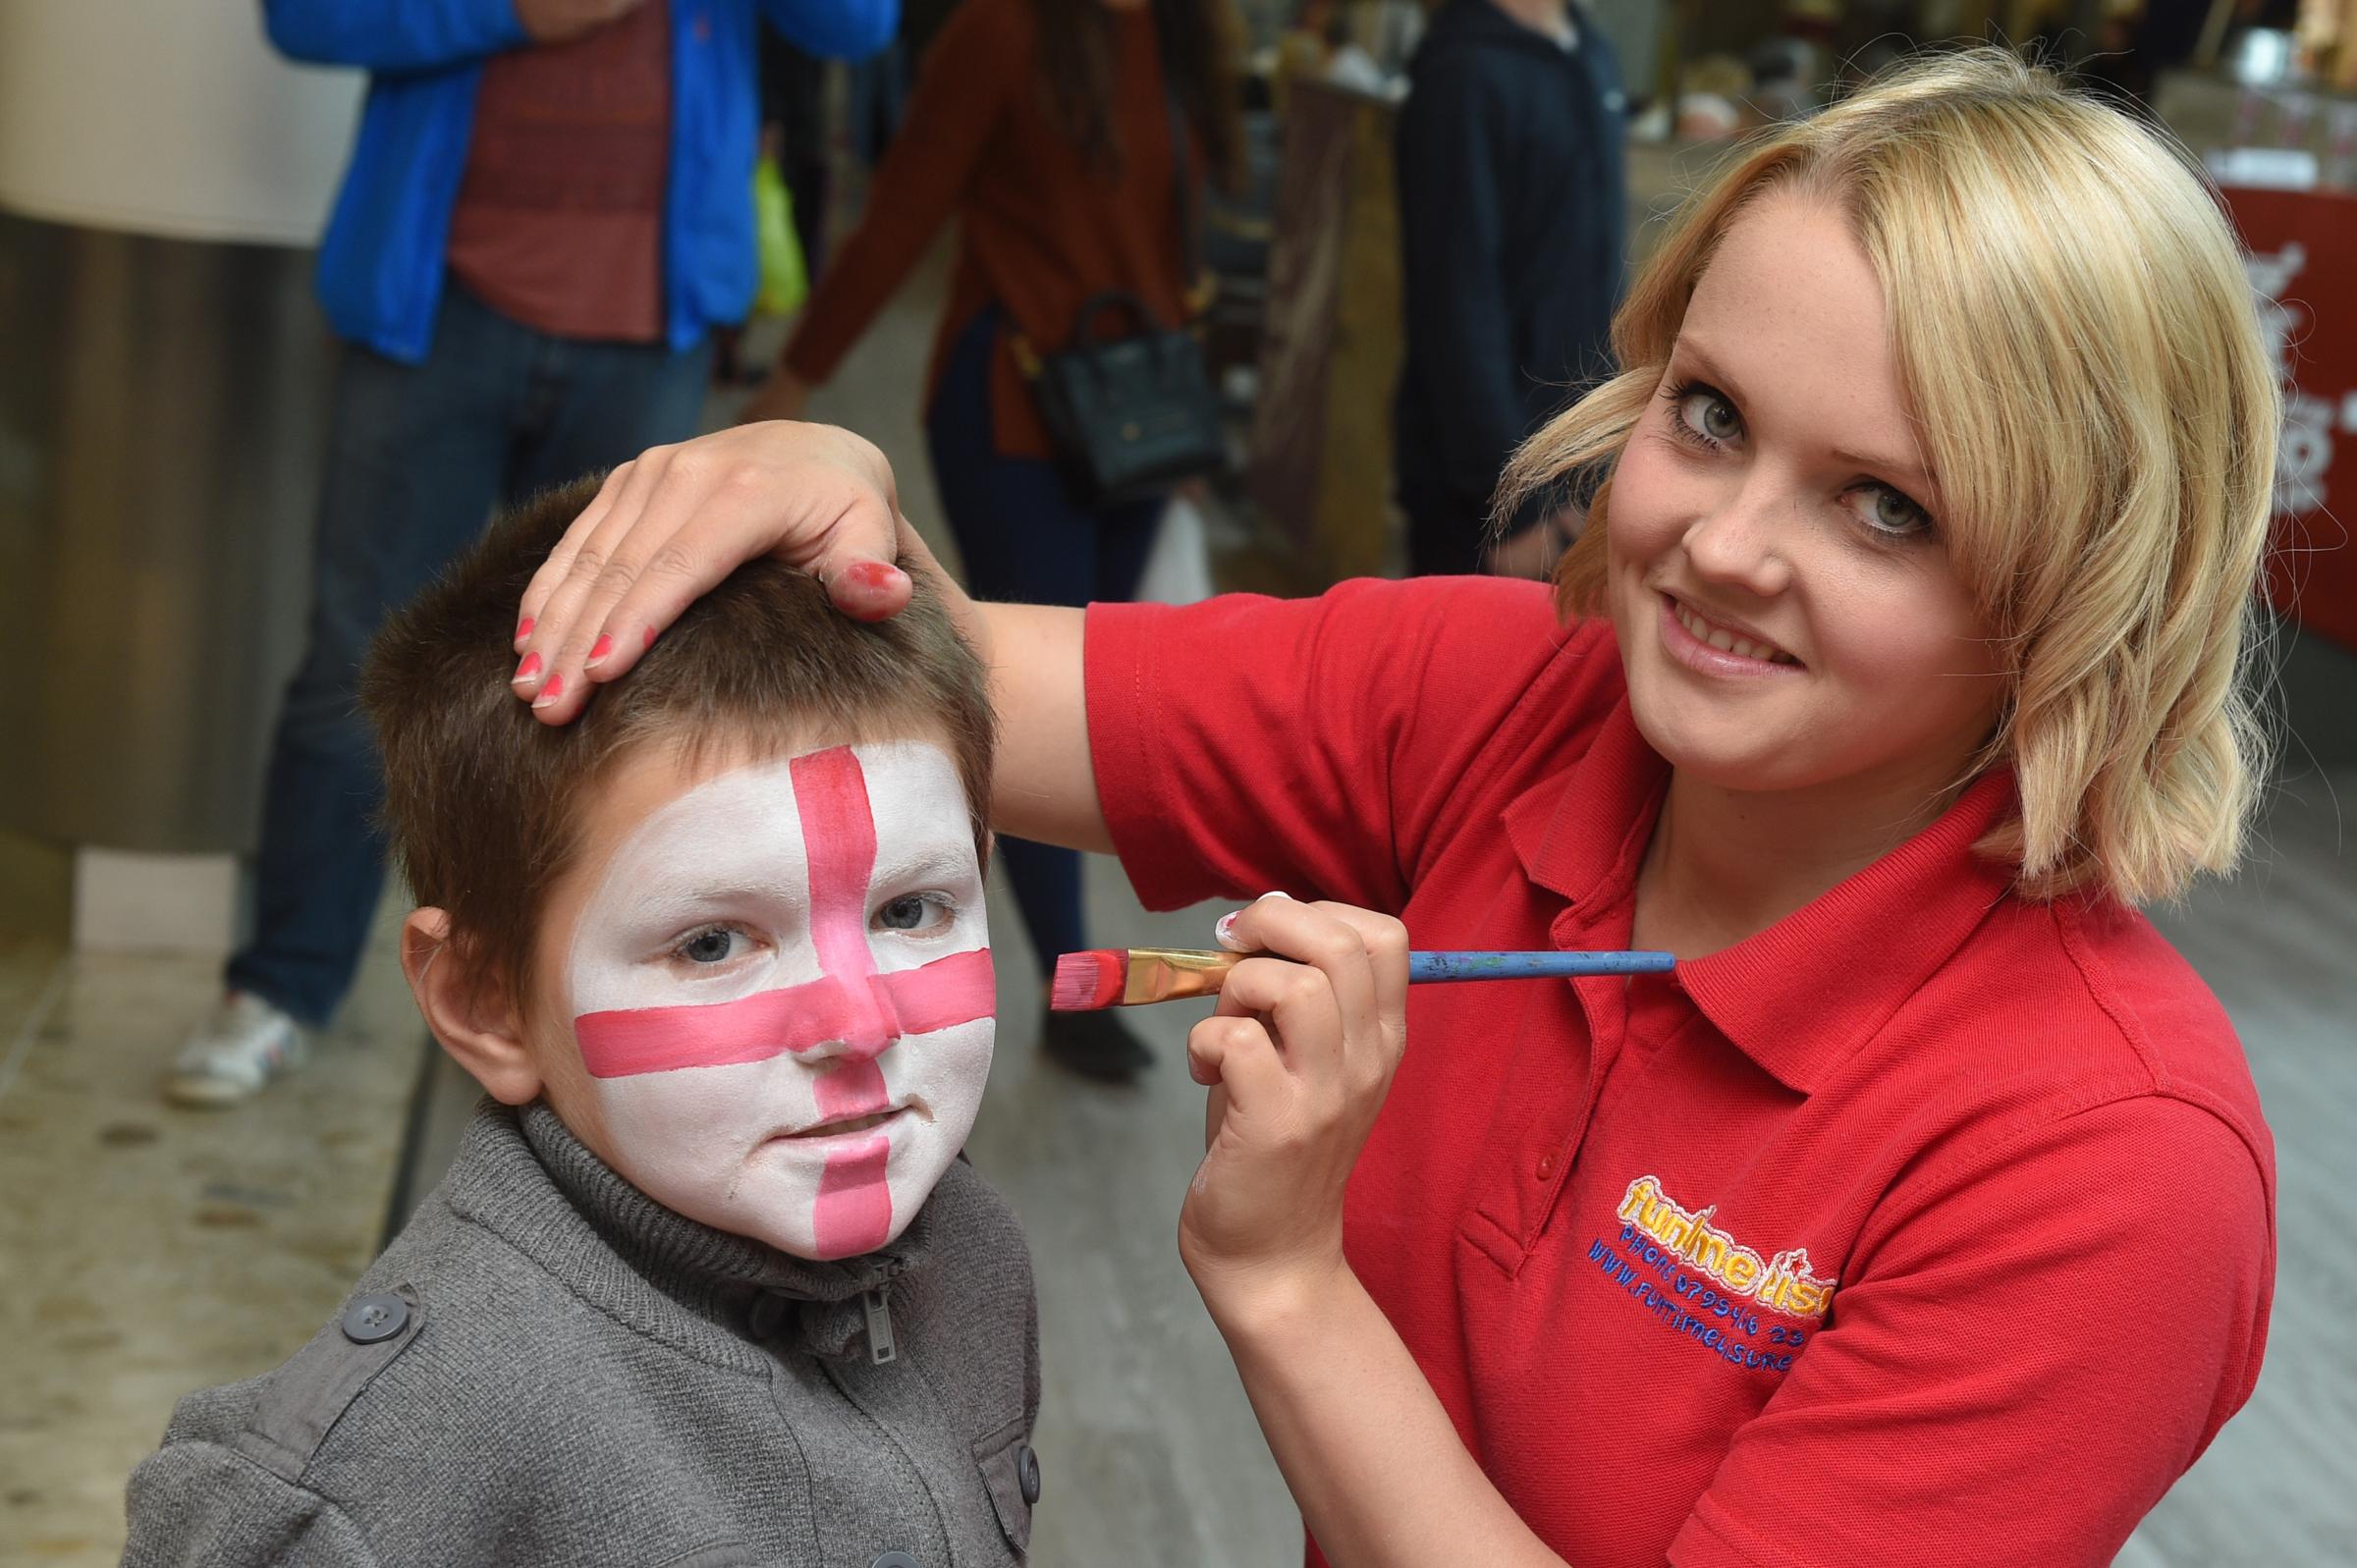 Getting your face painted? Send us a photo!